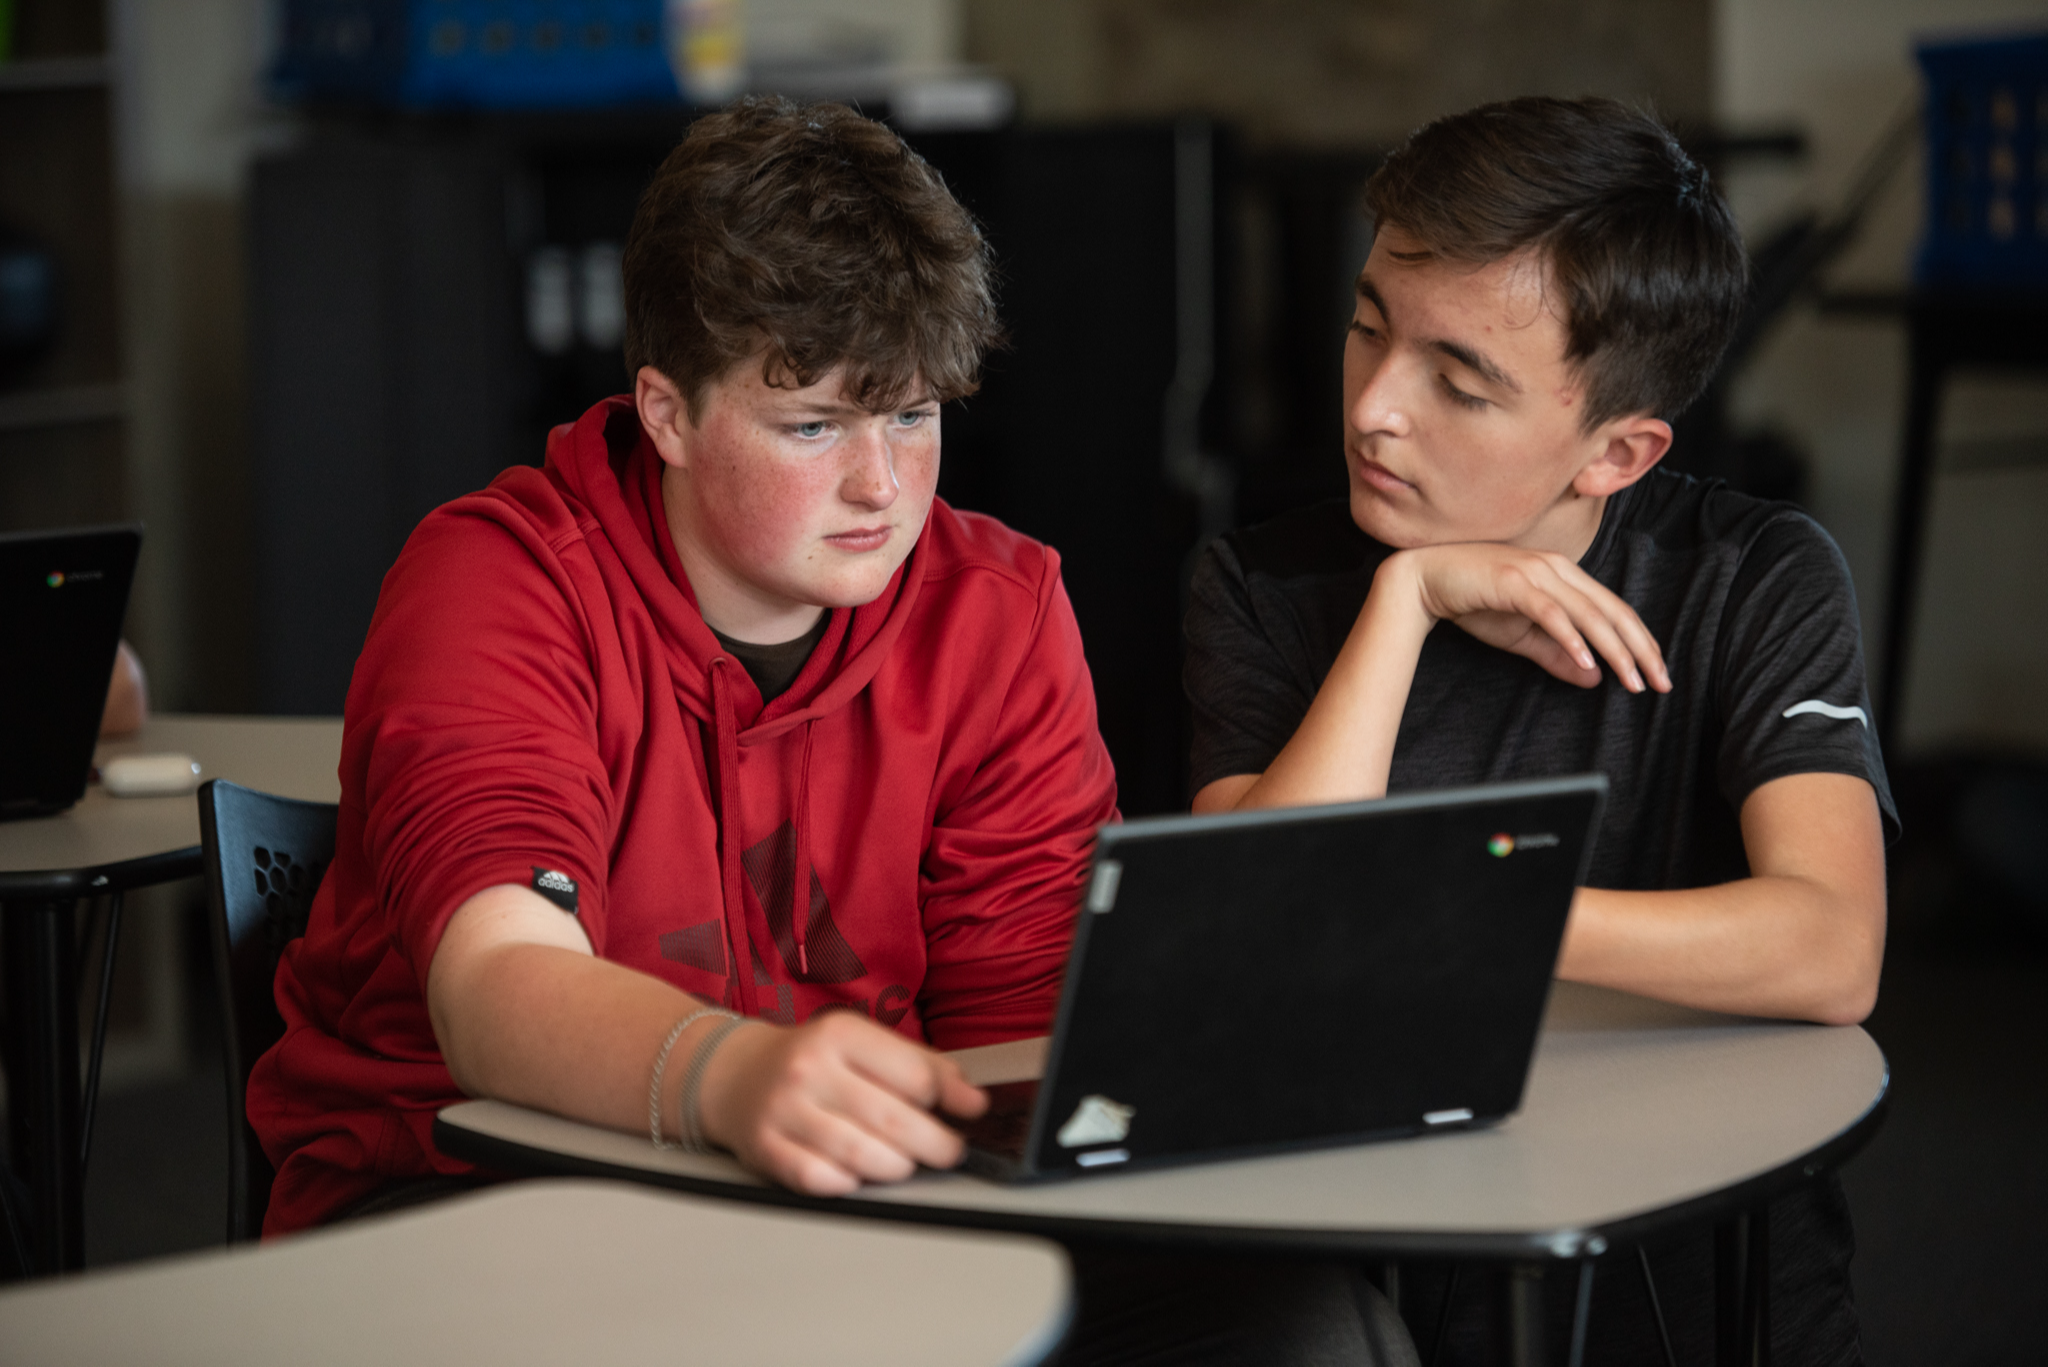 two males students looking at a computer